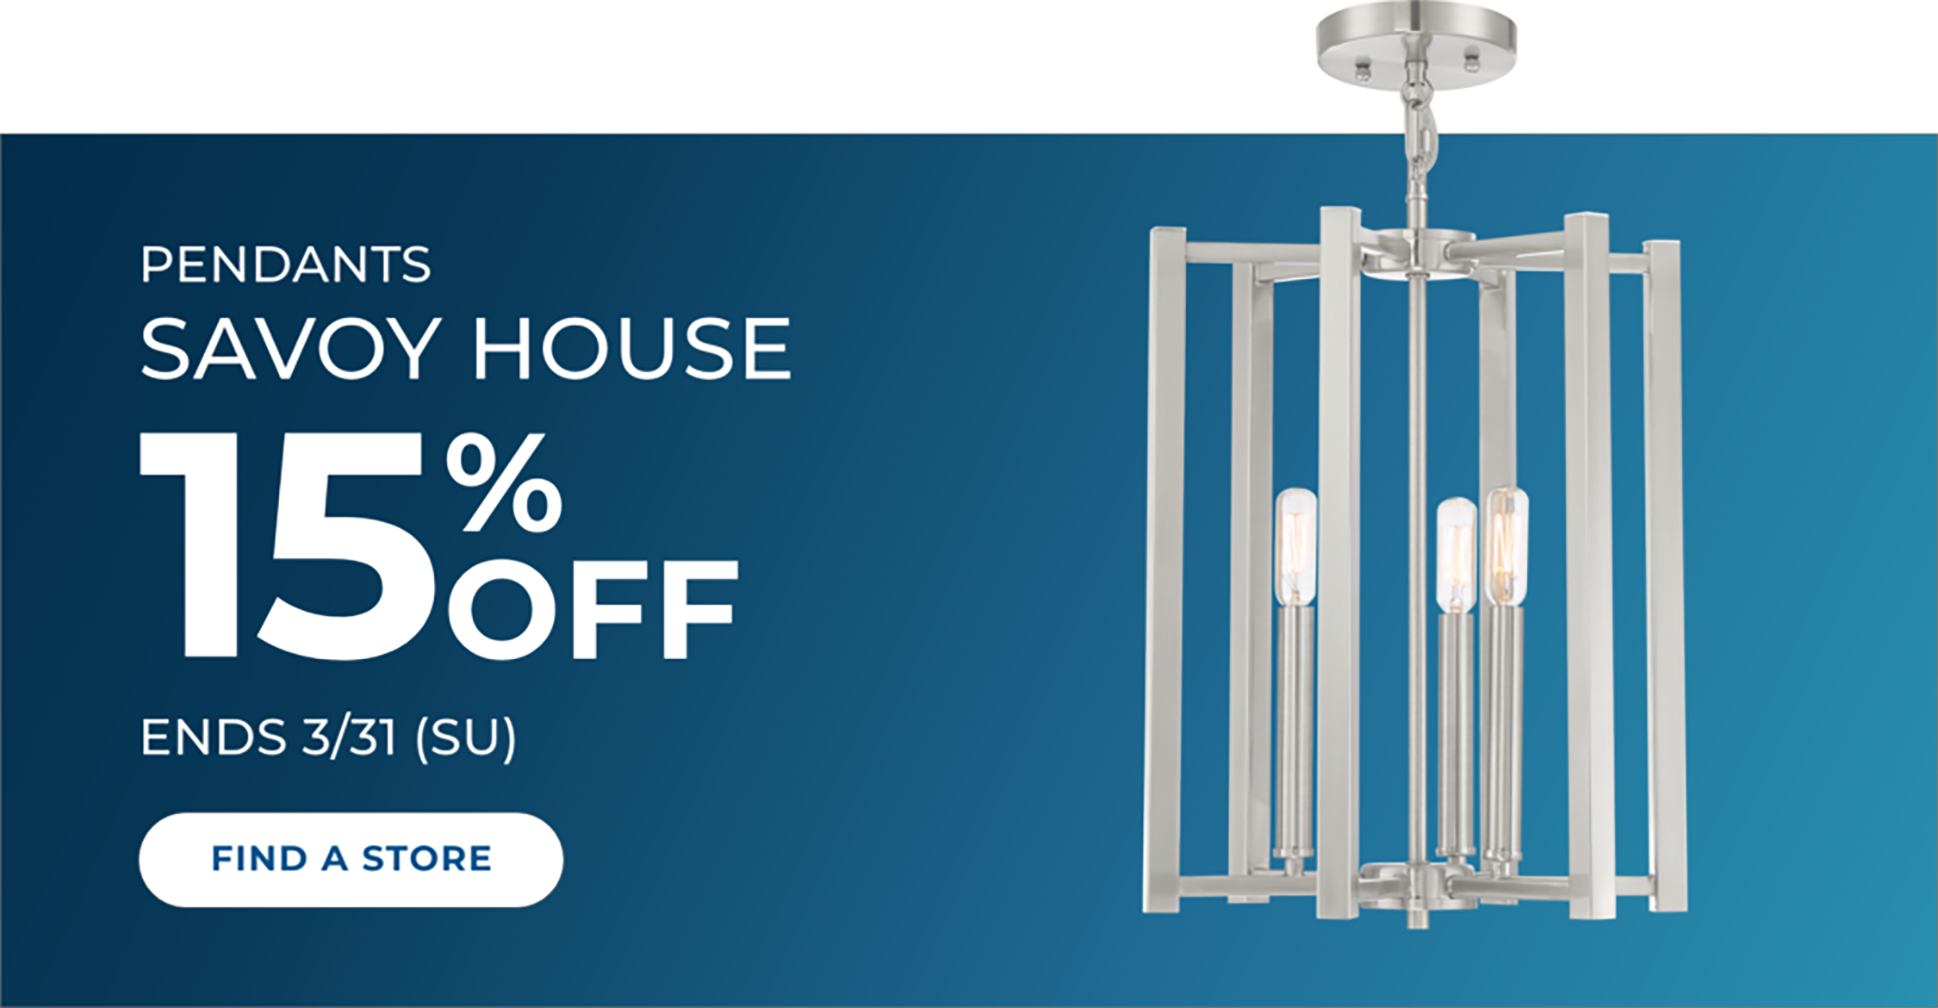 Save 15% on pendants from Savoy House. Ends 3/31.